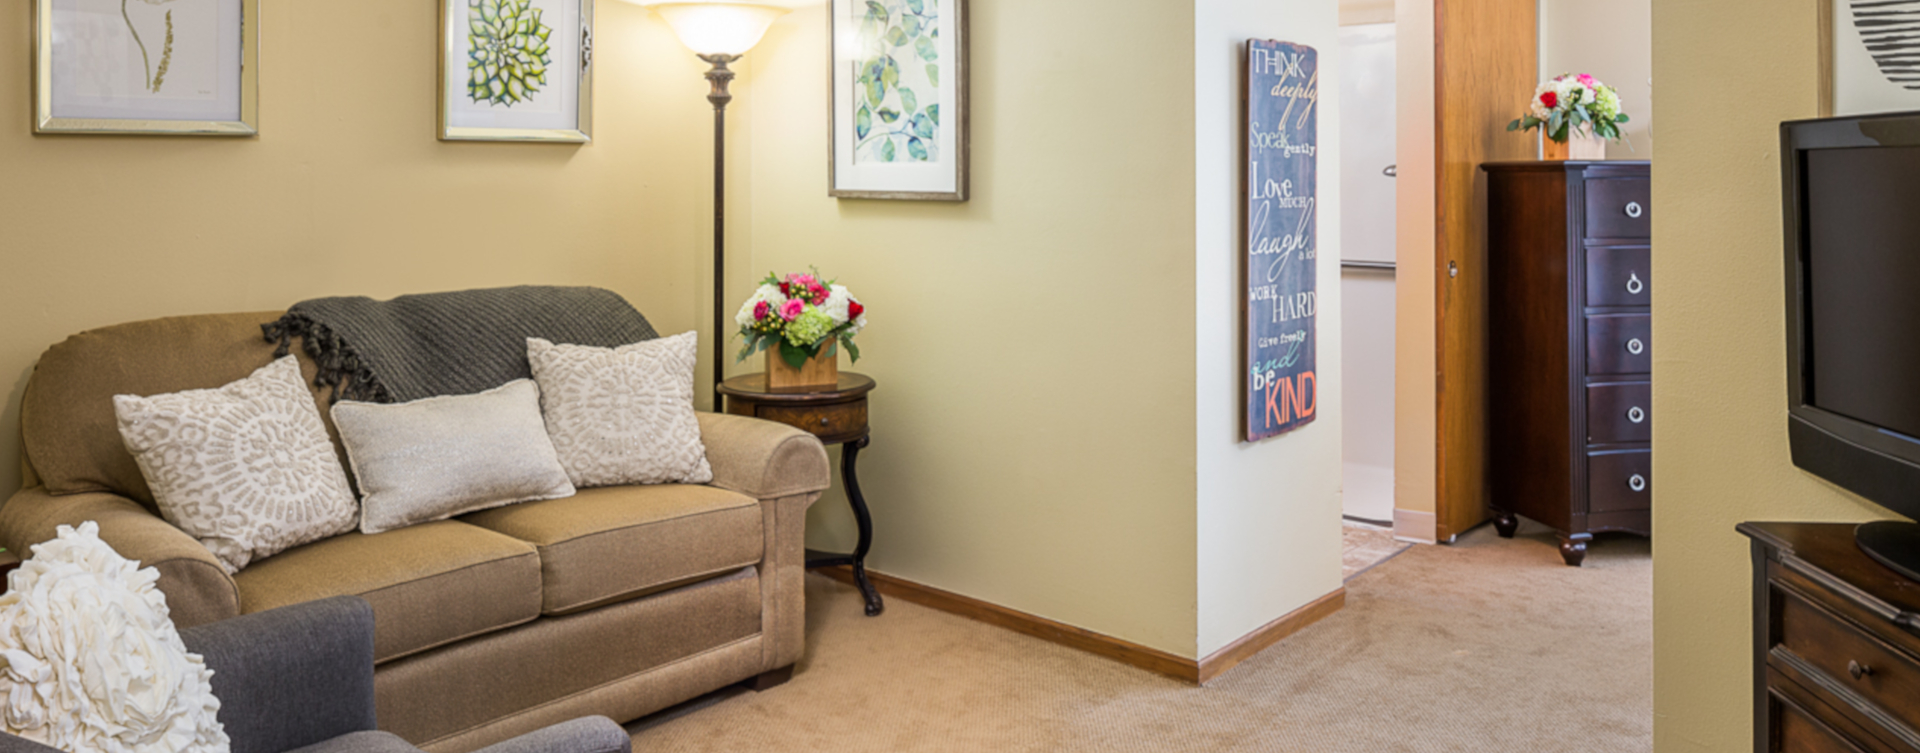 Enjoy senior friendly amenities, personal climate control and security in an apartment at Bickford of Urbandale